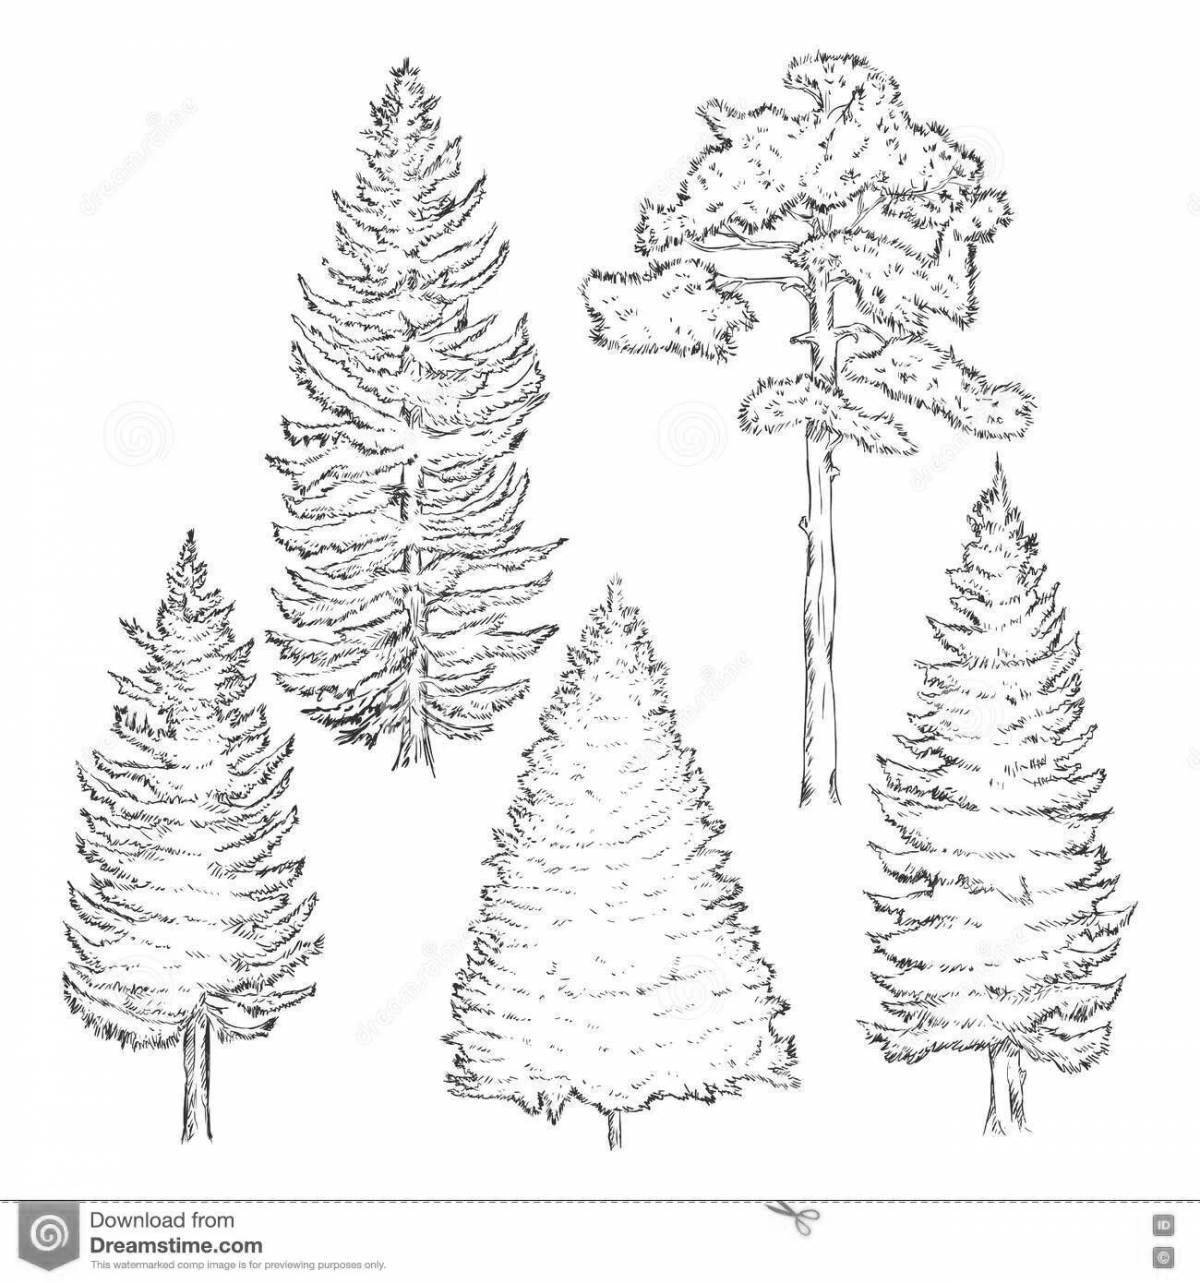 Exquisite spruce forest coloring page